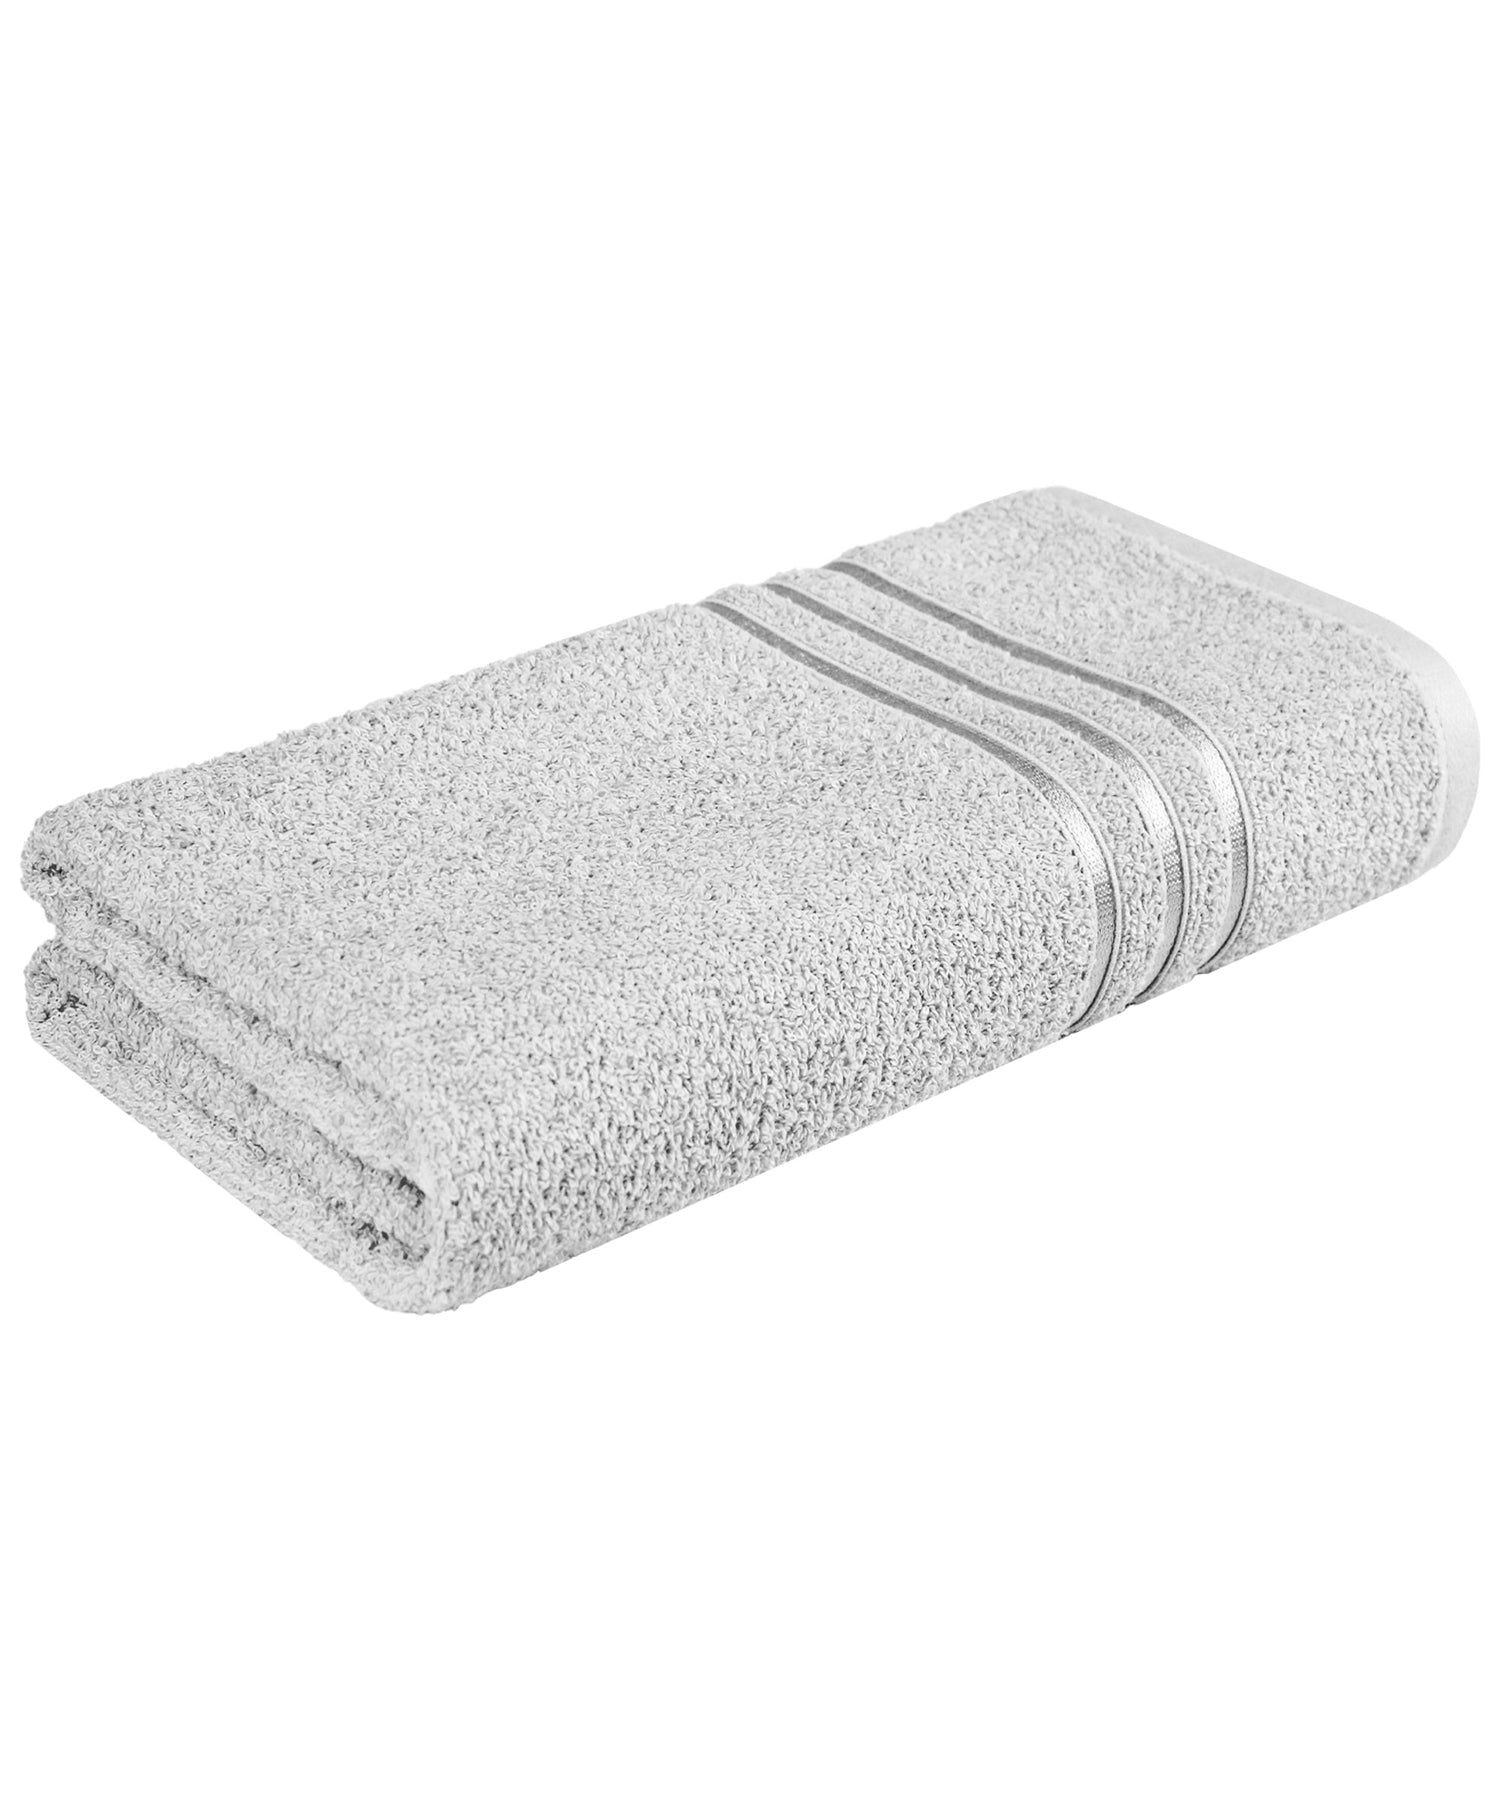 COMFORT LIVING TOWELS,100% Cotton,Quicky Dry,Light Weight, ICE GREY